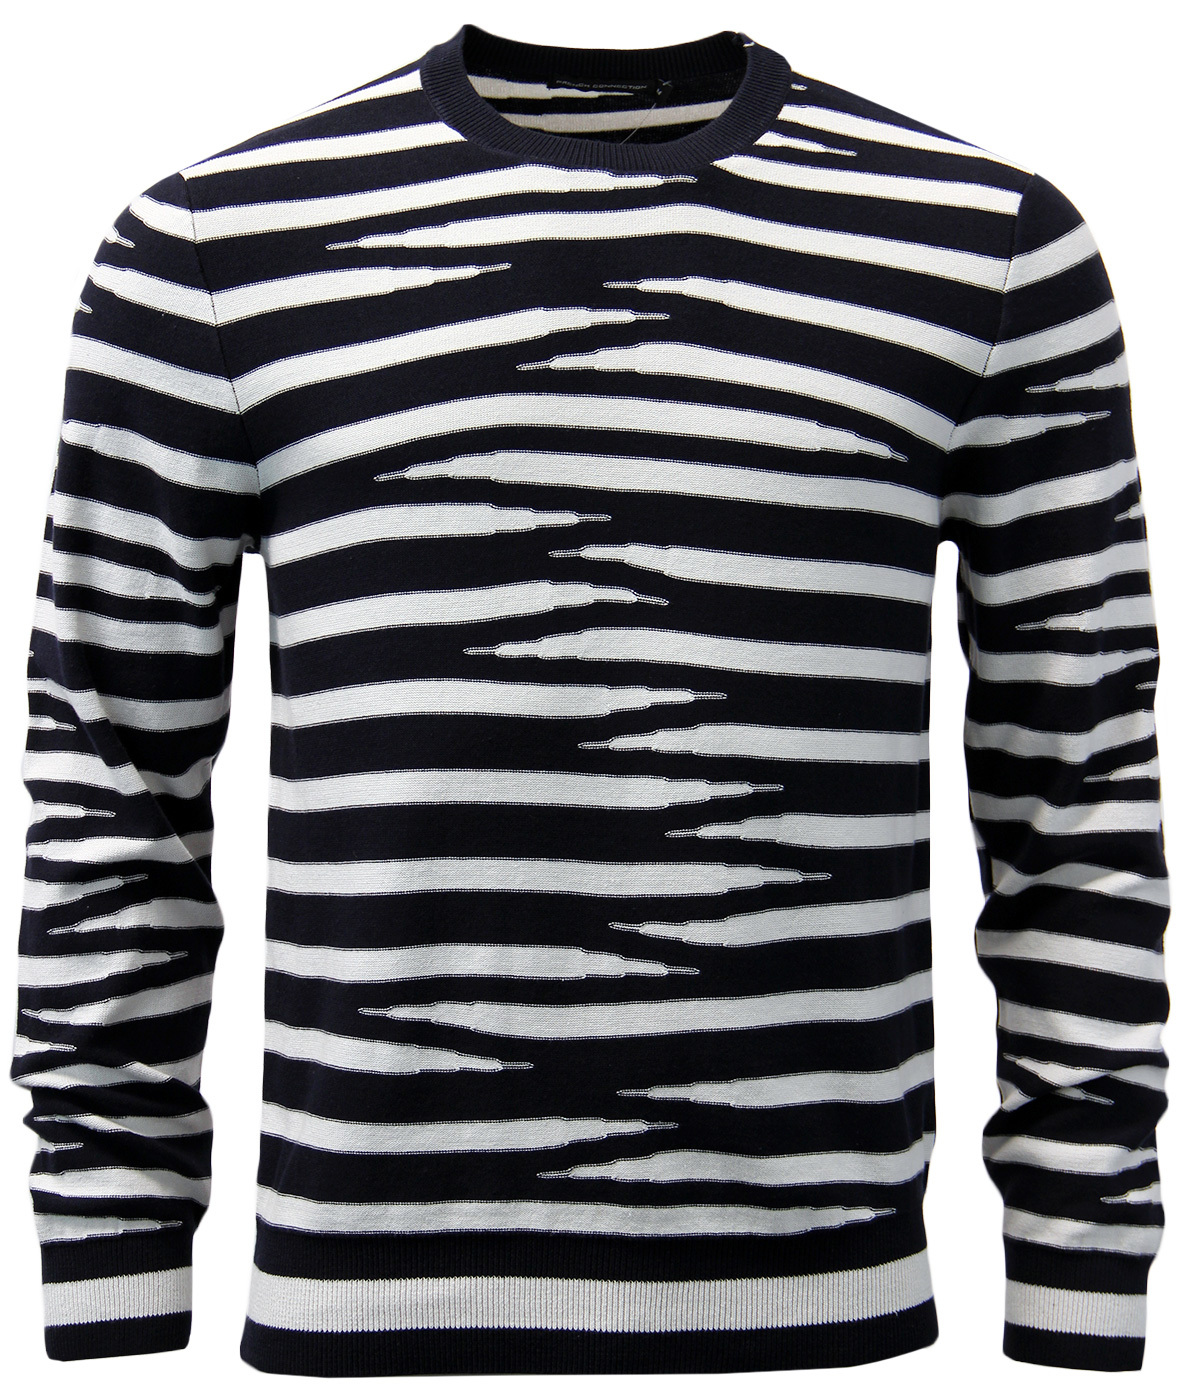 FRENCH CONNECTION Retro Tiger Stripe Knit Jumper